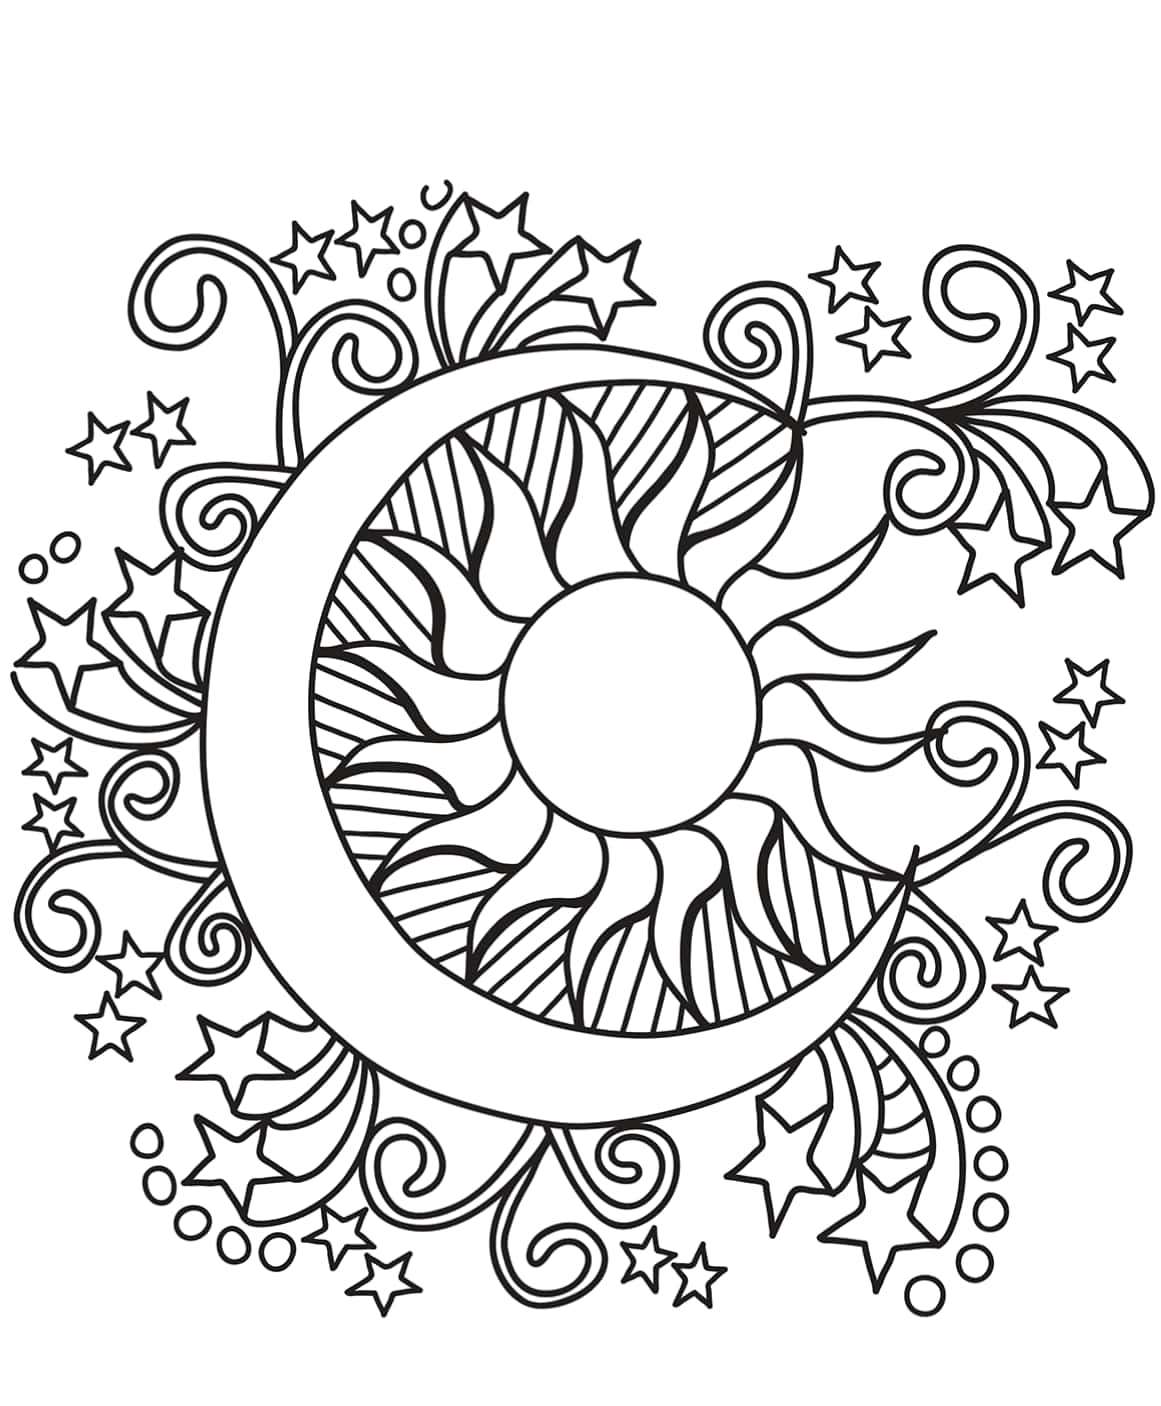 Unleash Your Imagination with a Relaxing Coloring Activity